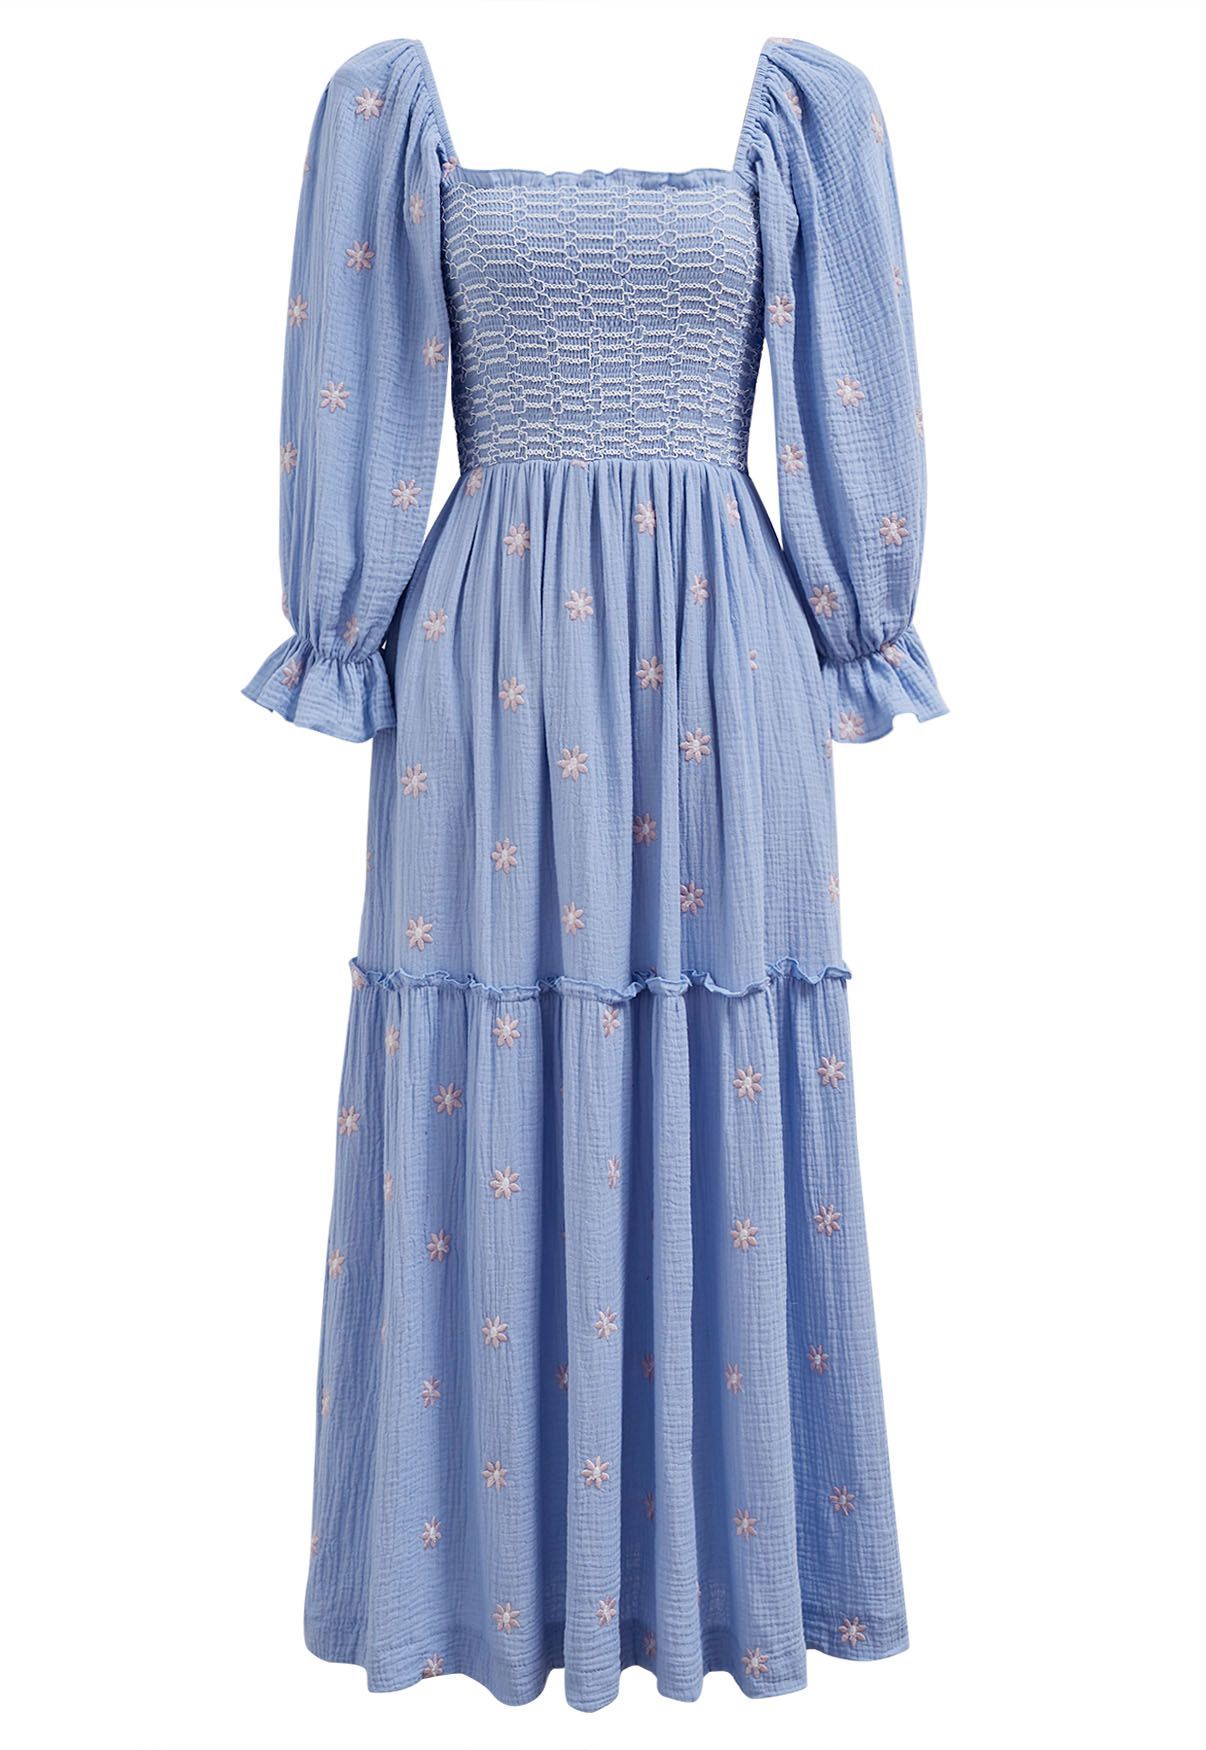 Floret Embroidery Square Neck Midi Dress in Blue | Chicwish